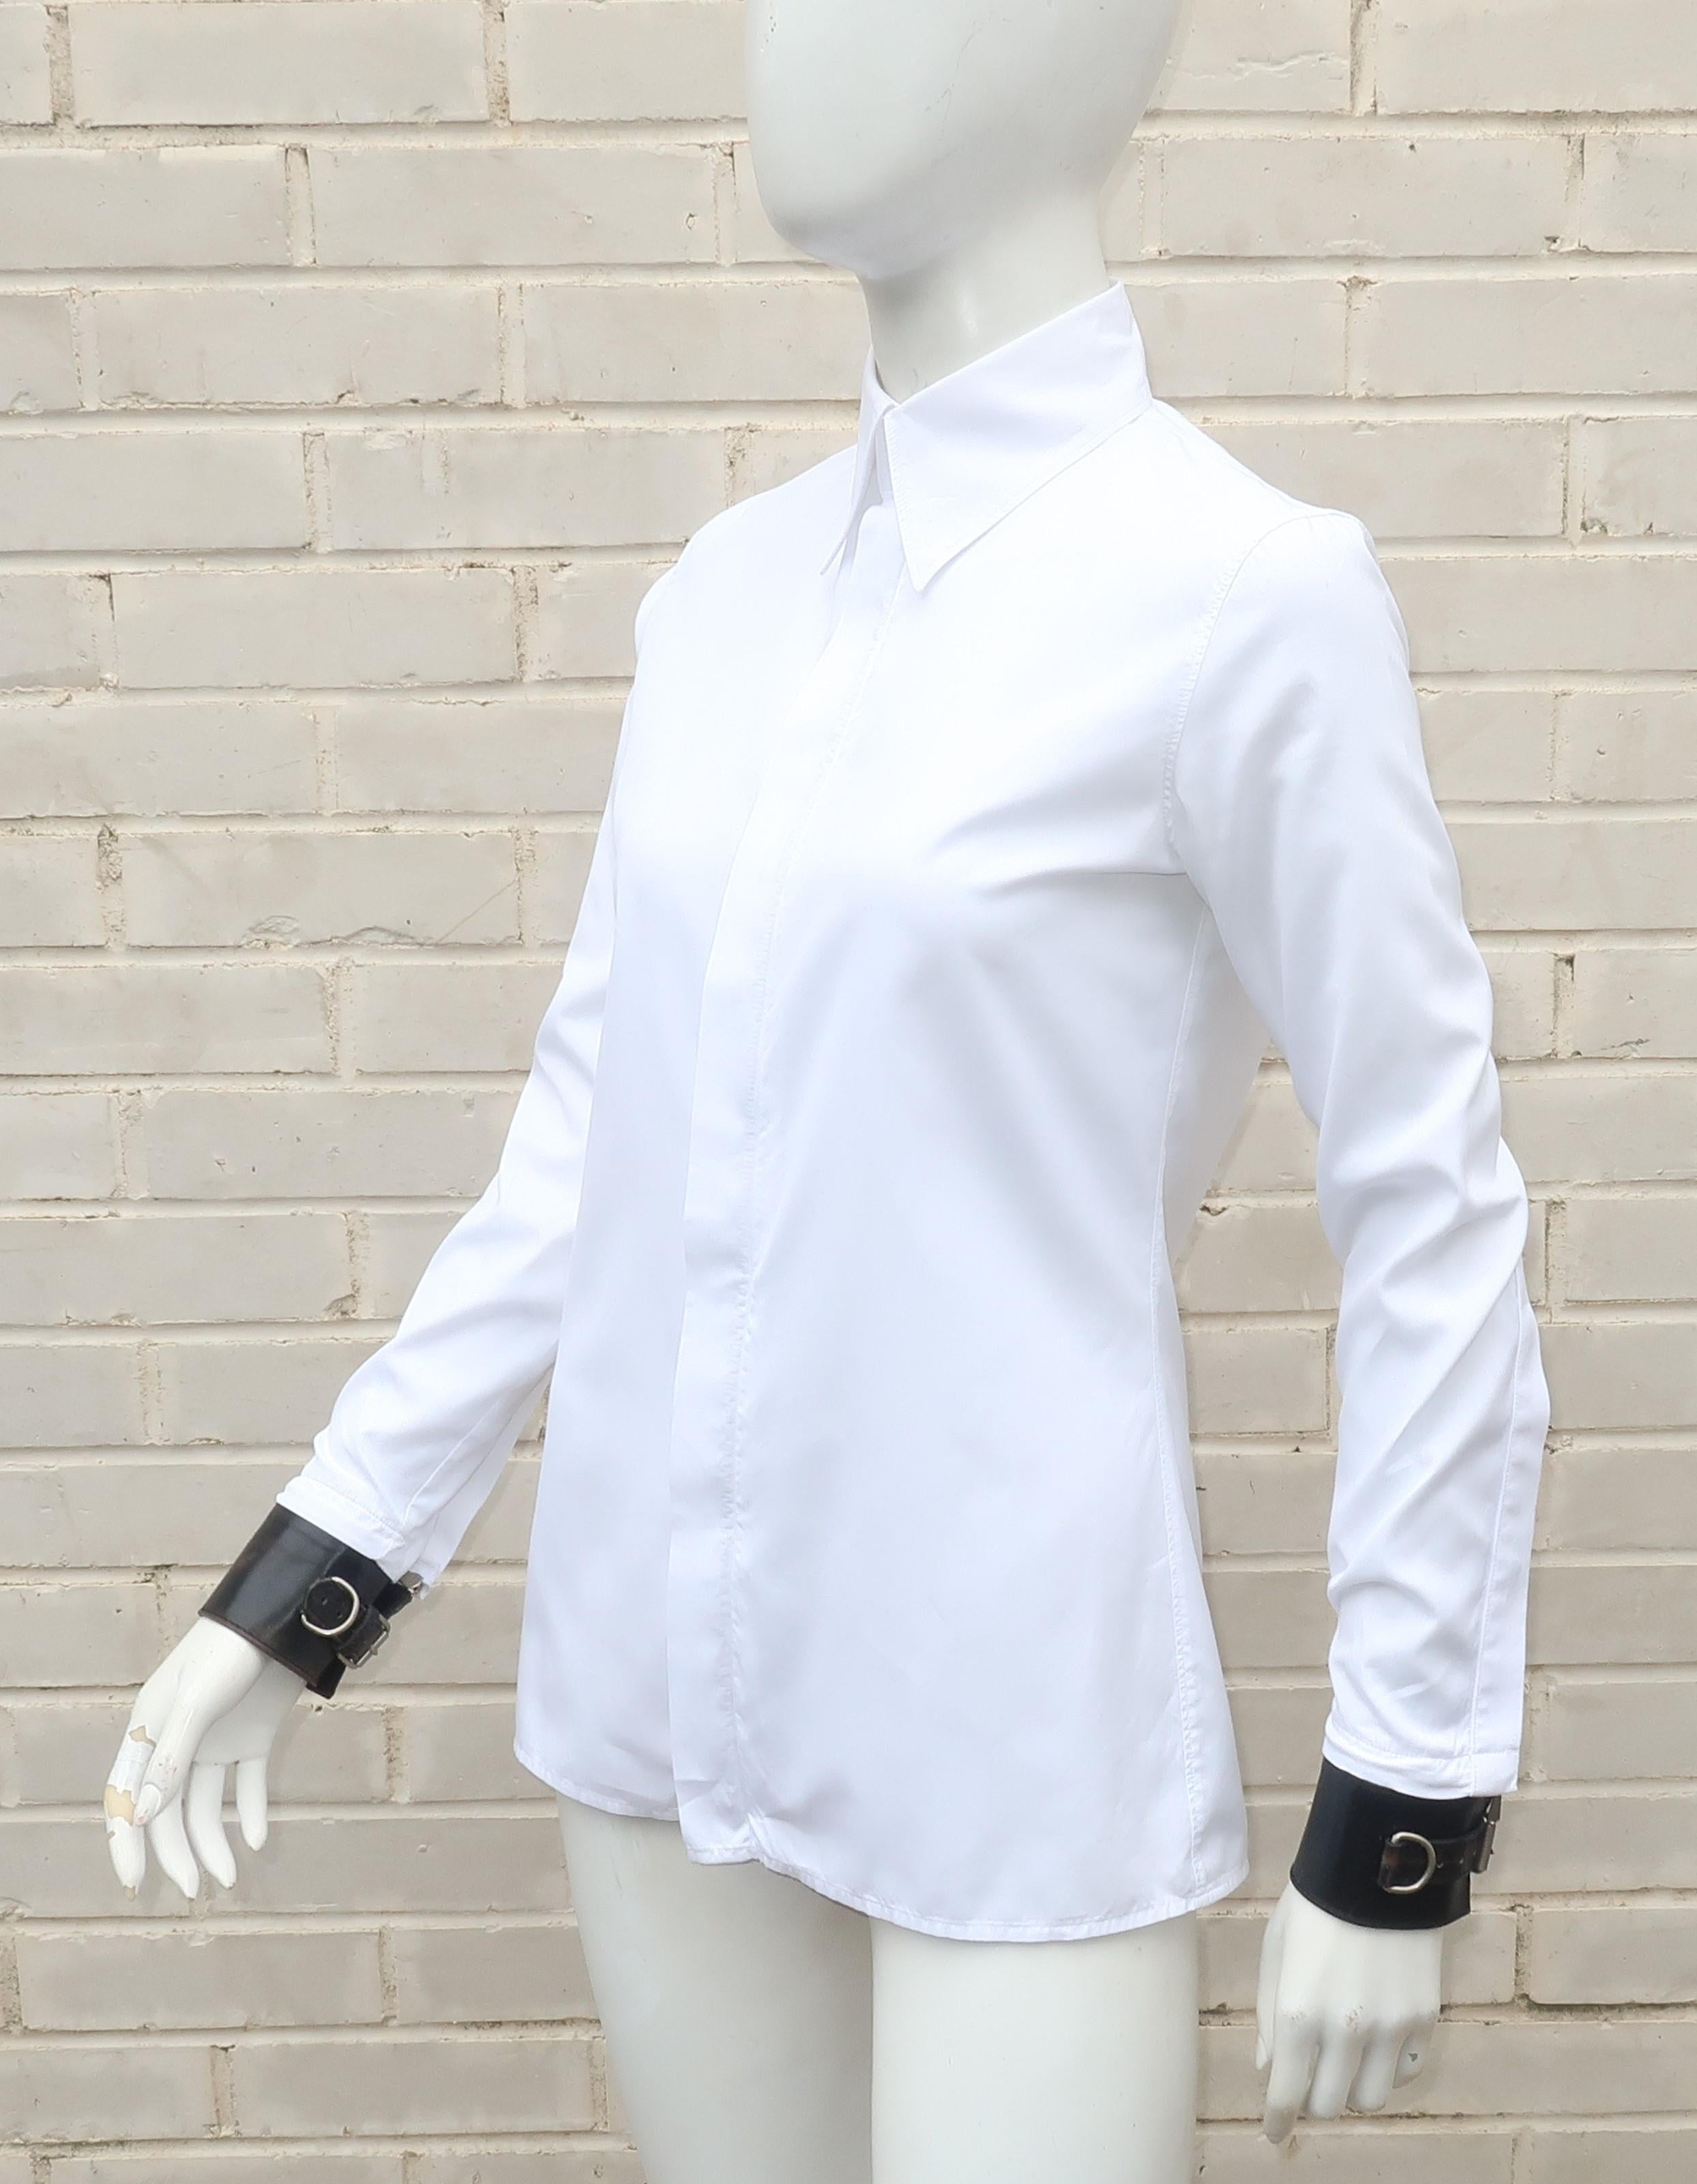 Blue Jean Paul Gaultier White Shirt With Black Leather Restraint Cuffs 